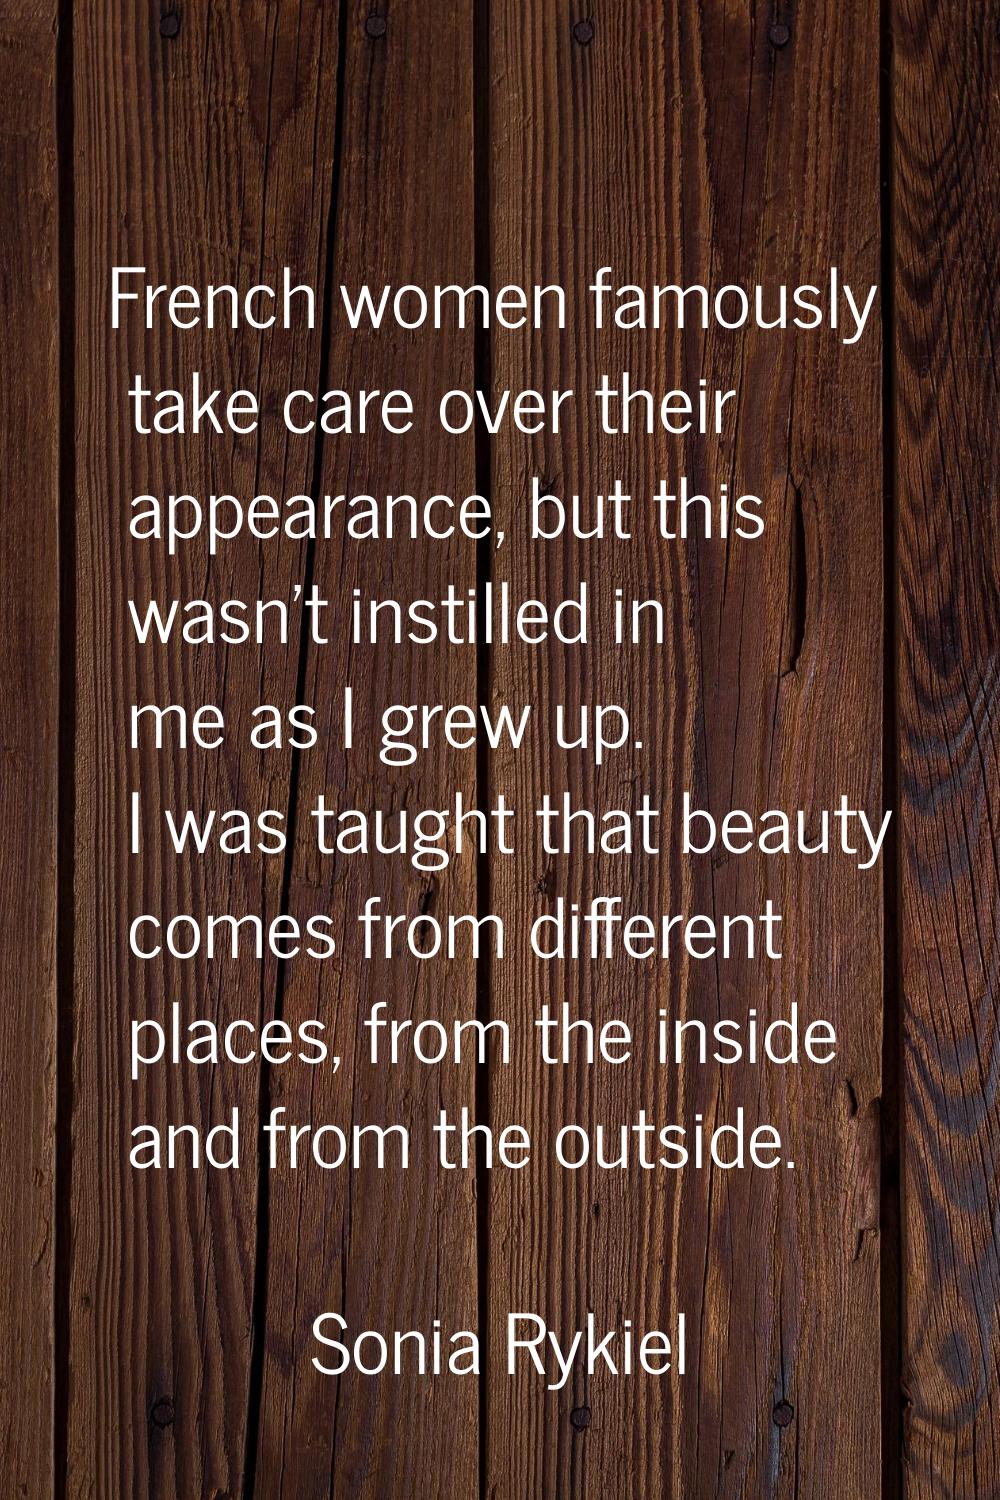 French women famously take care over their appearance, but this wasn't instilled in me as I grew up